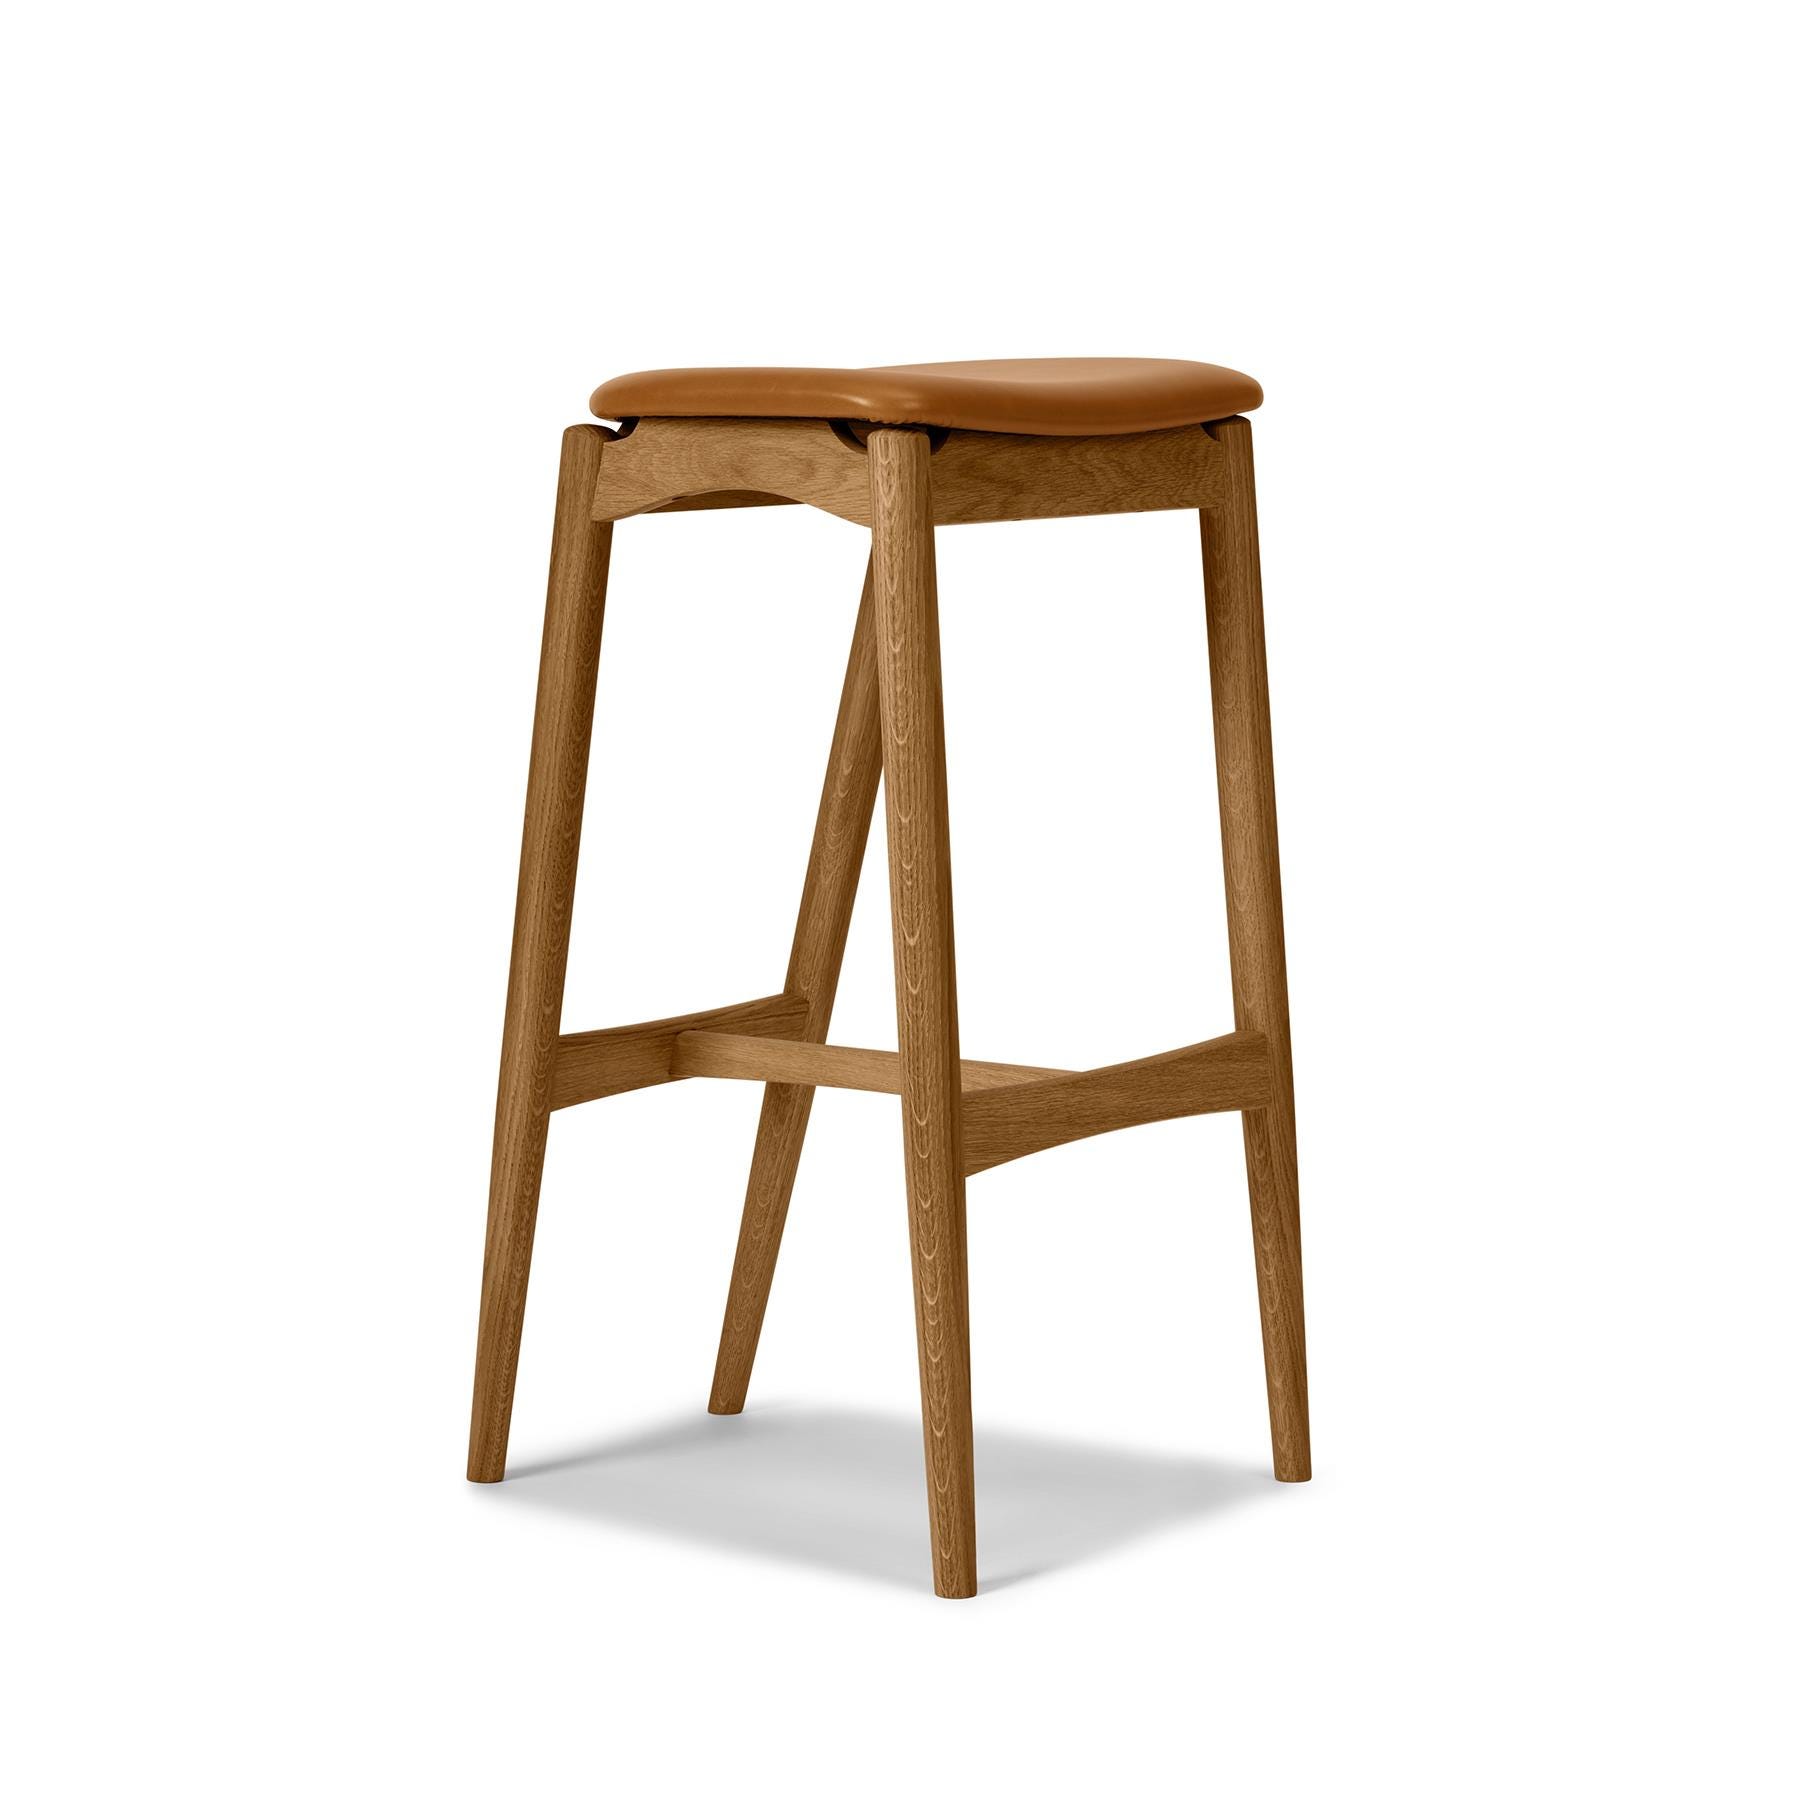 Sibast No 7 Stool Without Back Kitchen Counter Stool Natural Oil Oak Dunes Cognac 21000 Light Wood Designer Furniture From Holloways Of Ludlow